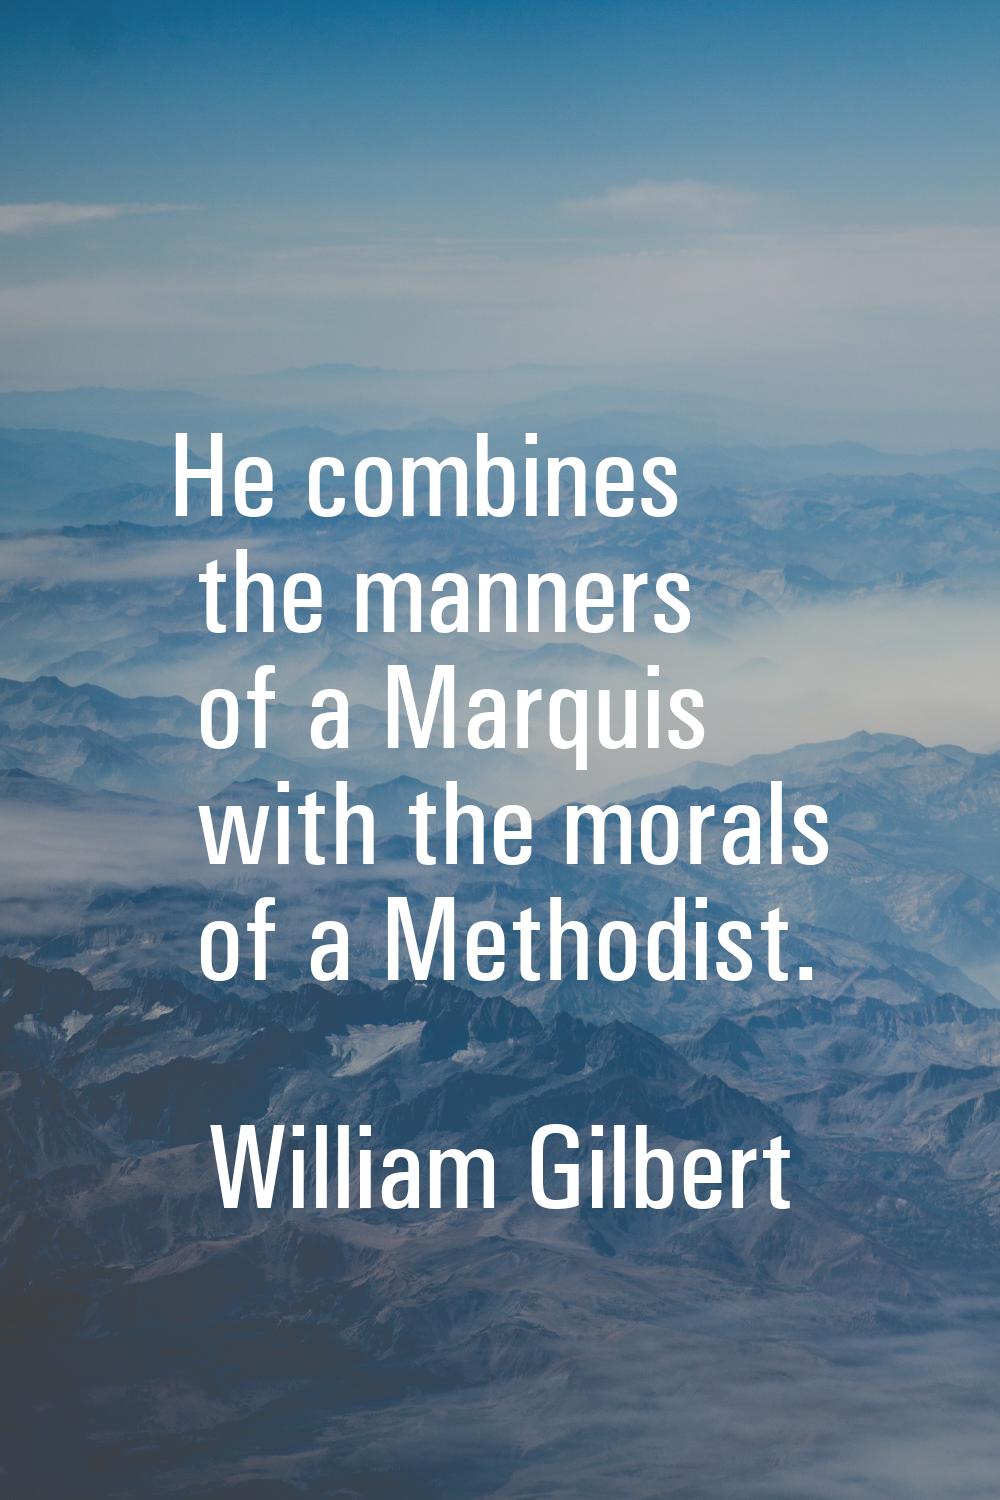 He combines the manners of a Marquis with the morals of a Methodist.